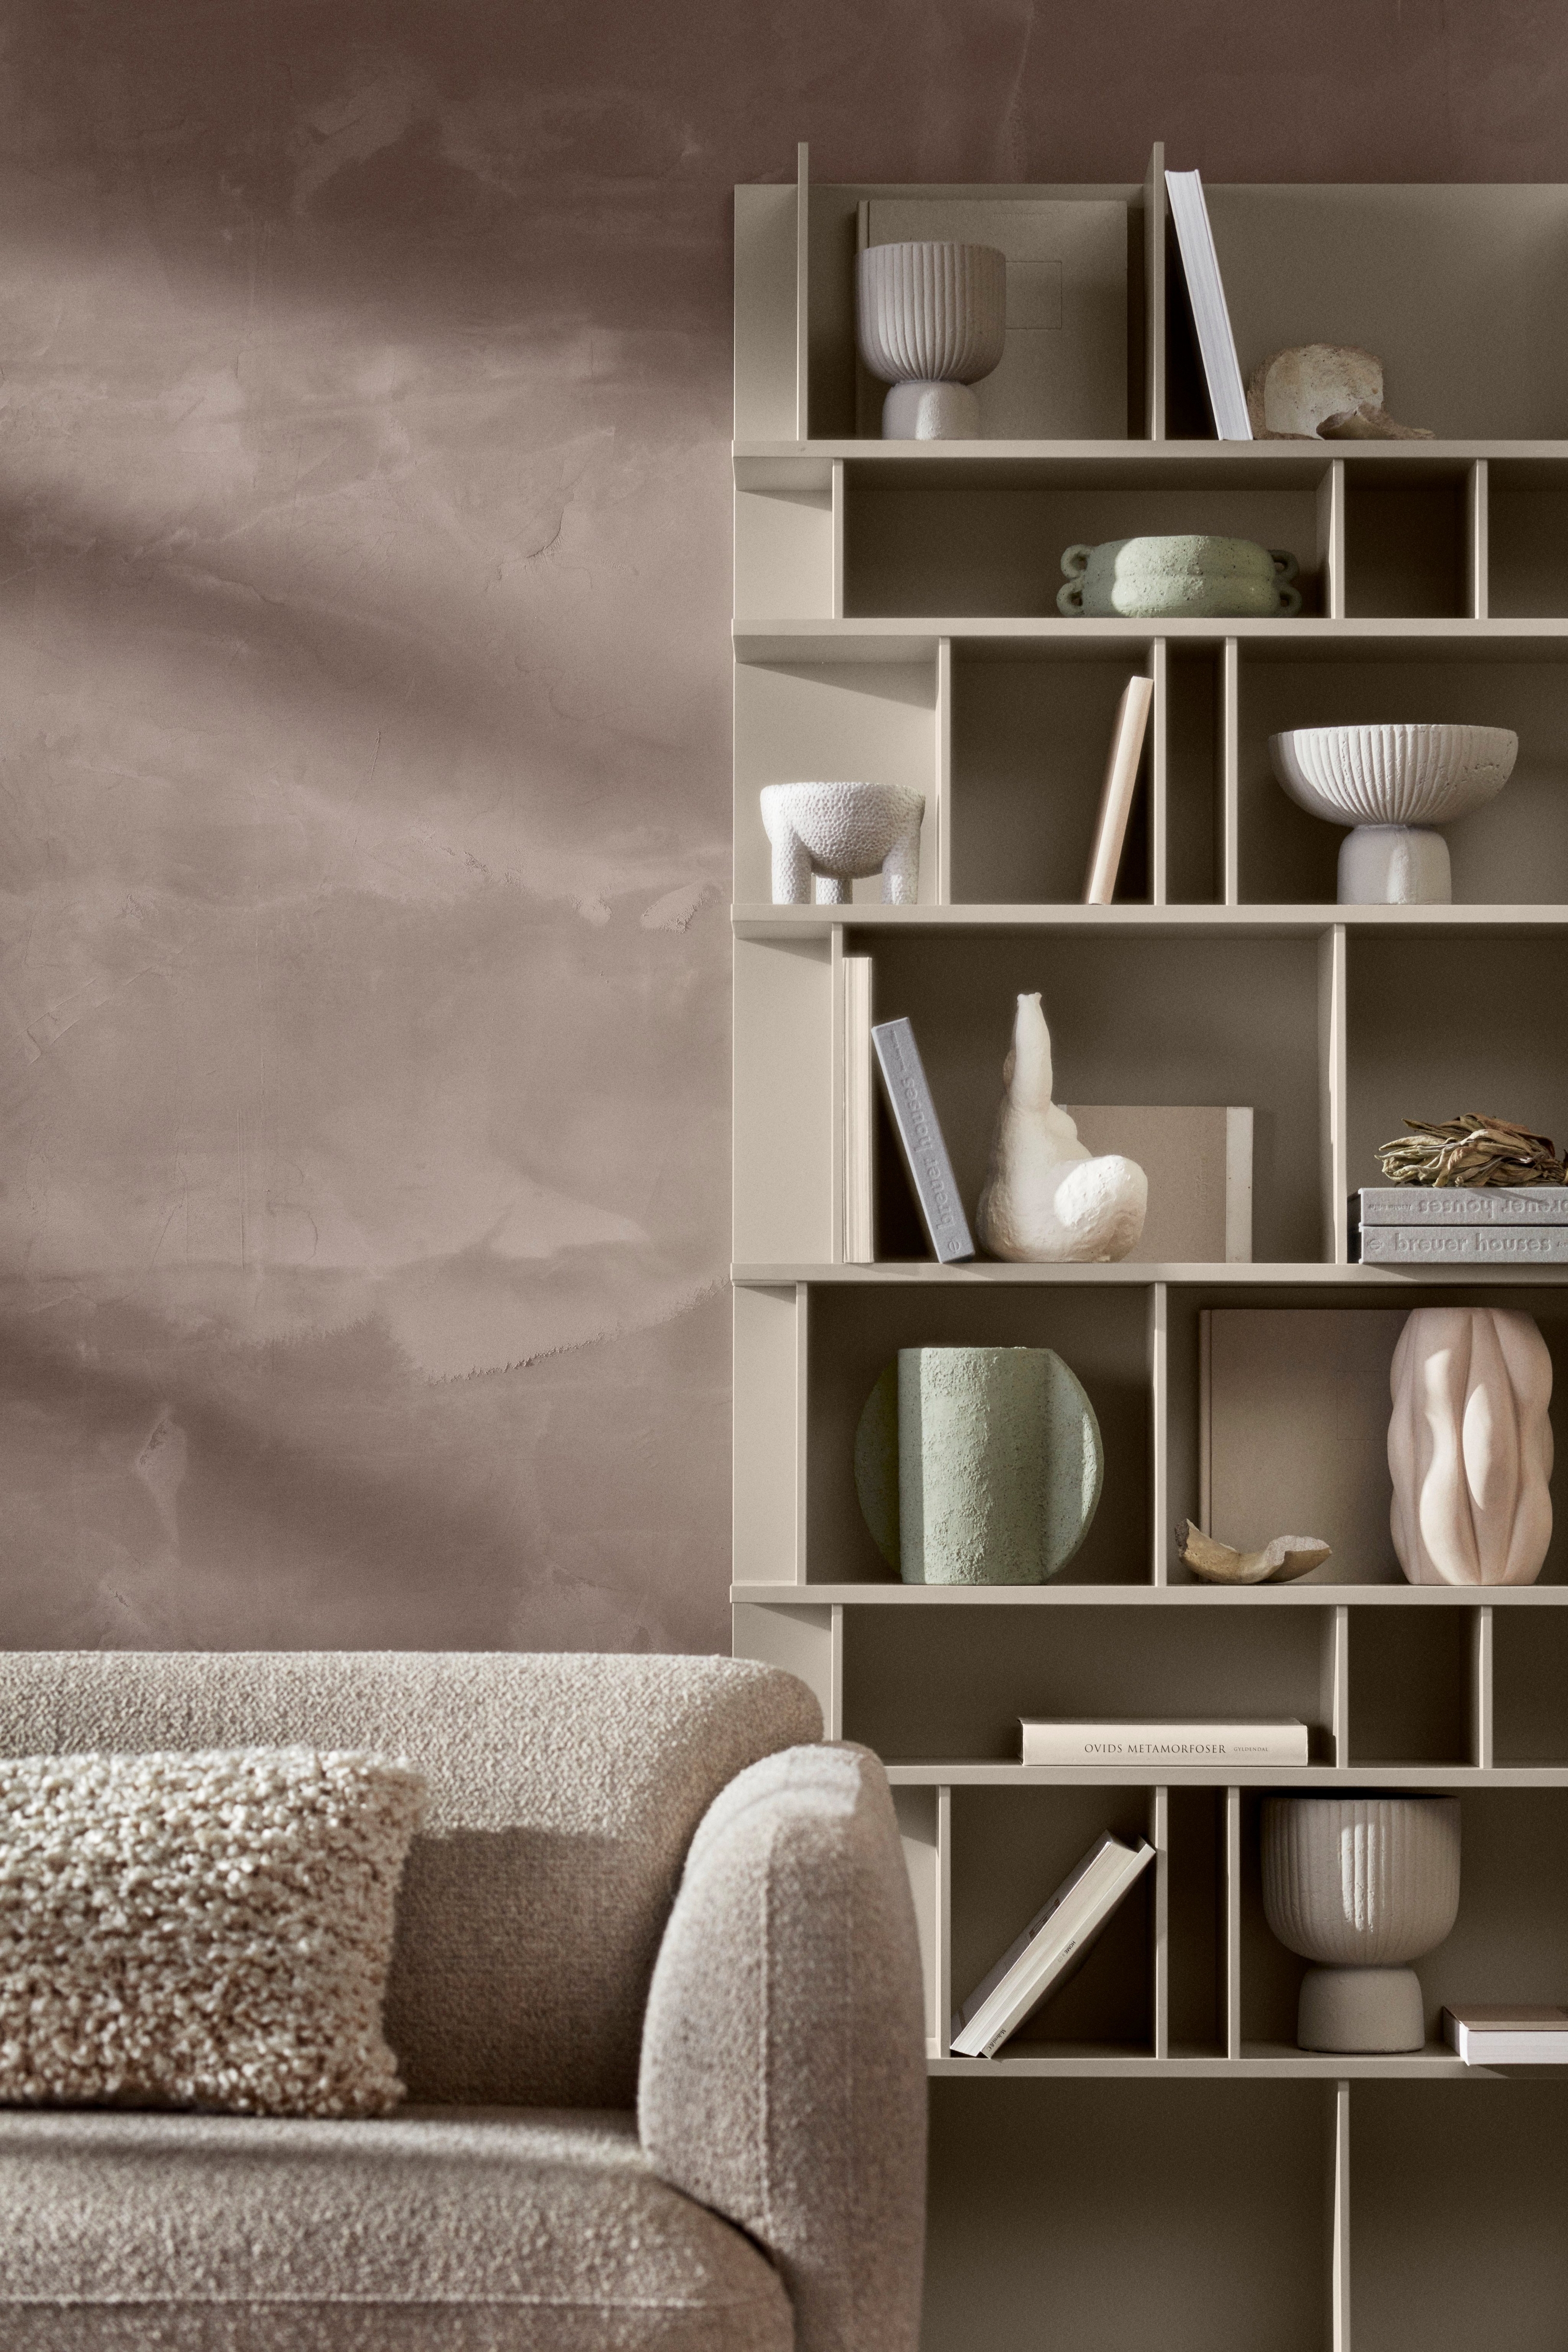 A modena sofa with a textured cushion and como shelving unit displaying assorted decorative items.